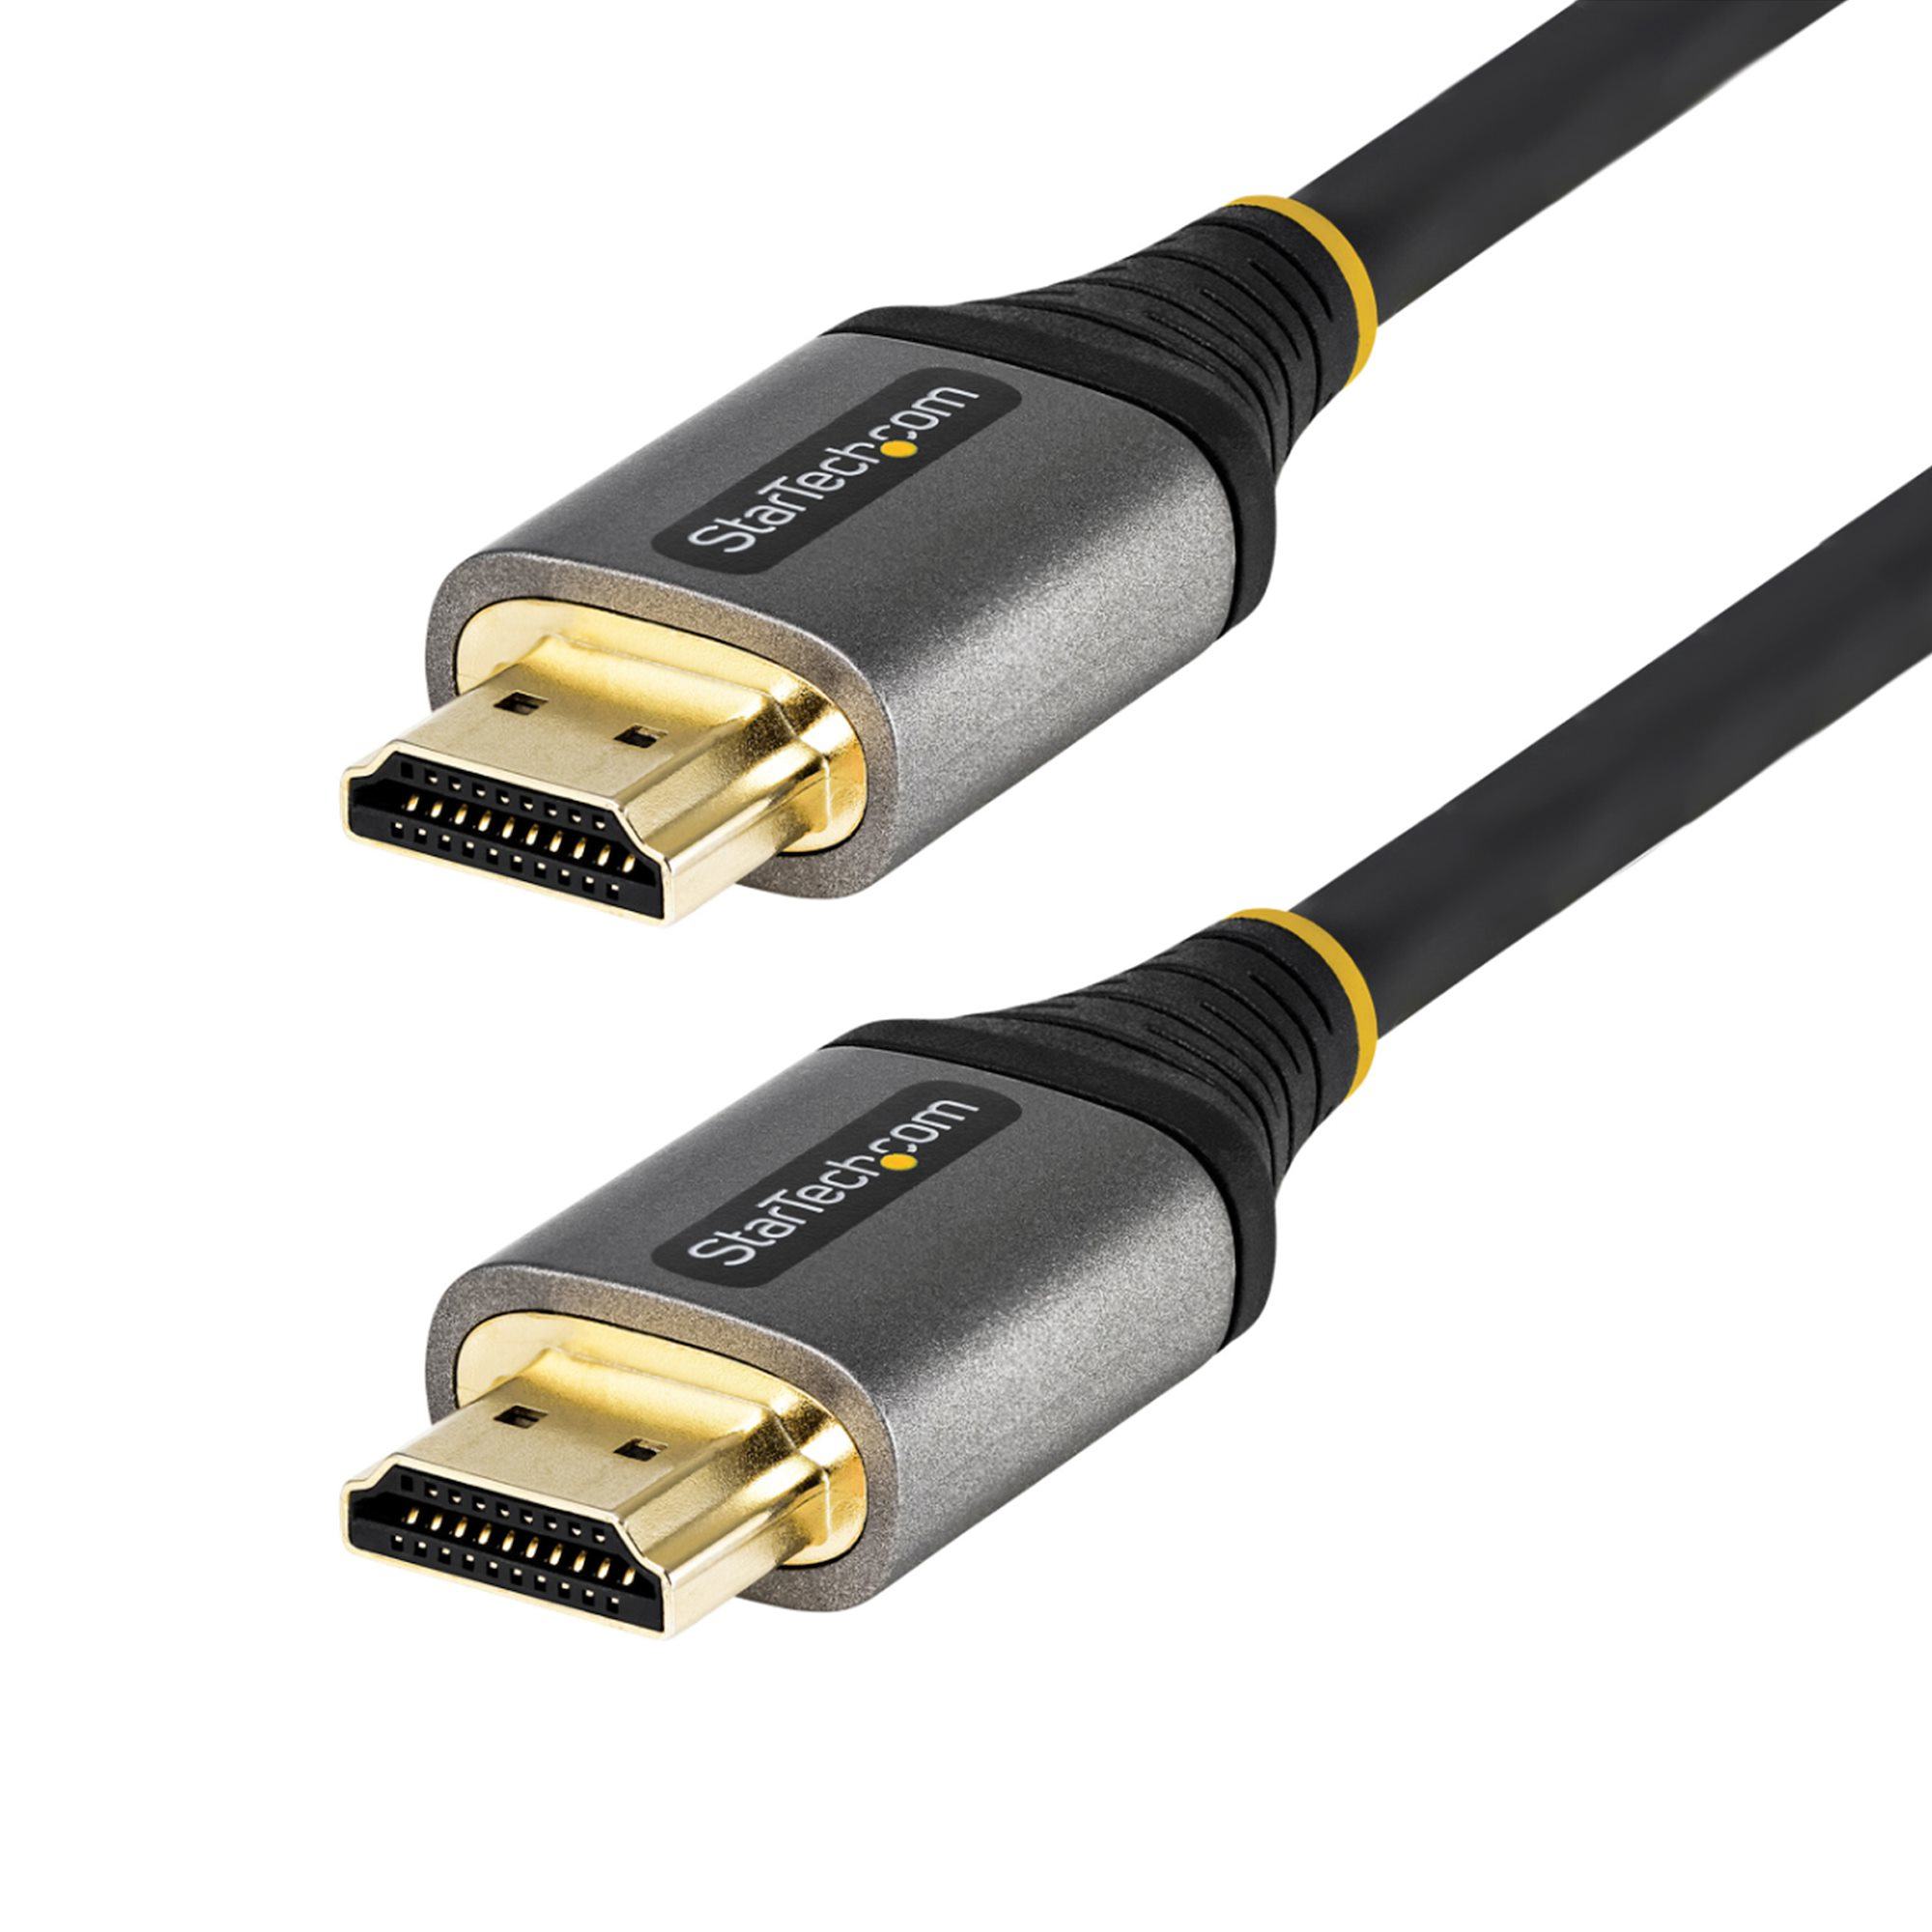 StarTech.com 20in (0.5m) Premium Certified HDMI 2.0 Cable with Ethernet, High-Speed Ultra HD 4K 60Hz HDMI Cable HDR10, ARC, HDMI Cord For Ultra HD Monitors, TVs, Displays, w/ TPE Jacket - Durable HDMI Video Cable (HDMMV50CM)